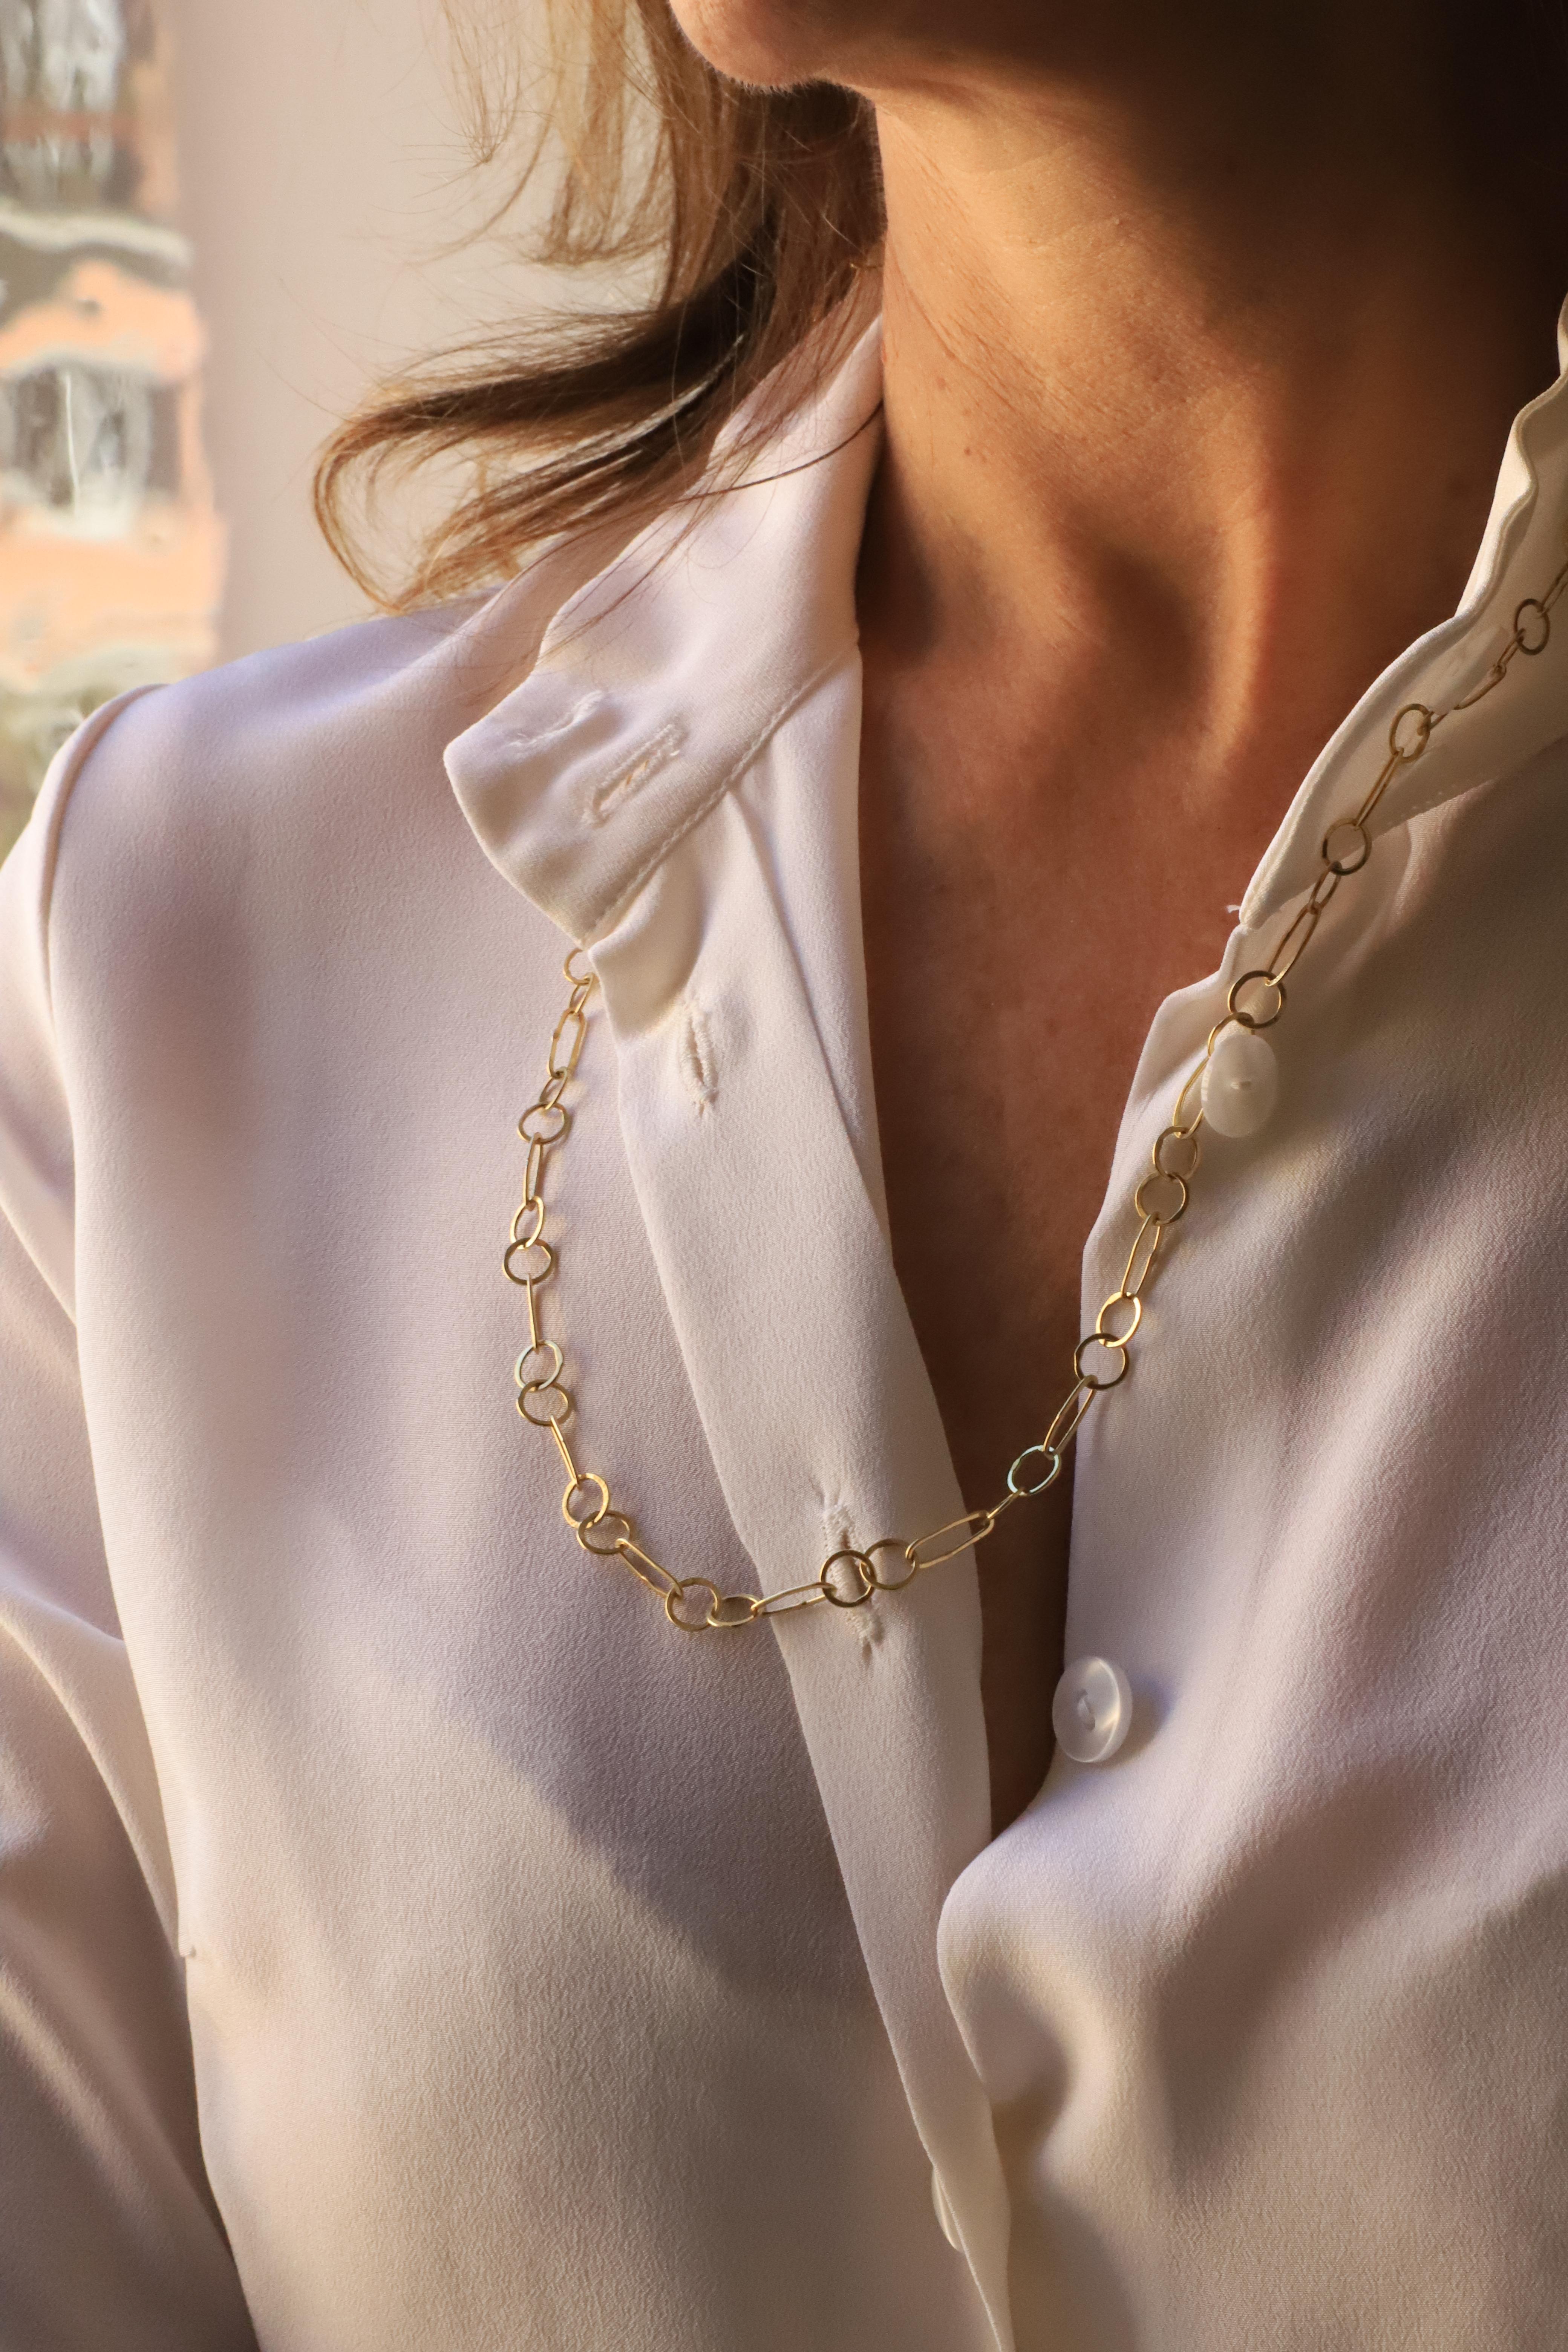 Rossella Ugolini Design Collection , a Modern Style 18 Karat Yellow Gold Handmade Slightly Paperclip Link Necklace
Here there is a luminous links necklace slightly hammered and handcrafted in 18 karats yellow gold. Simple yet versatile, easy to